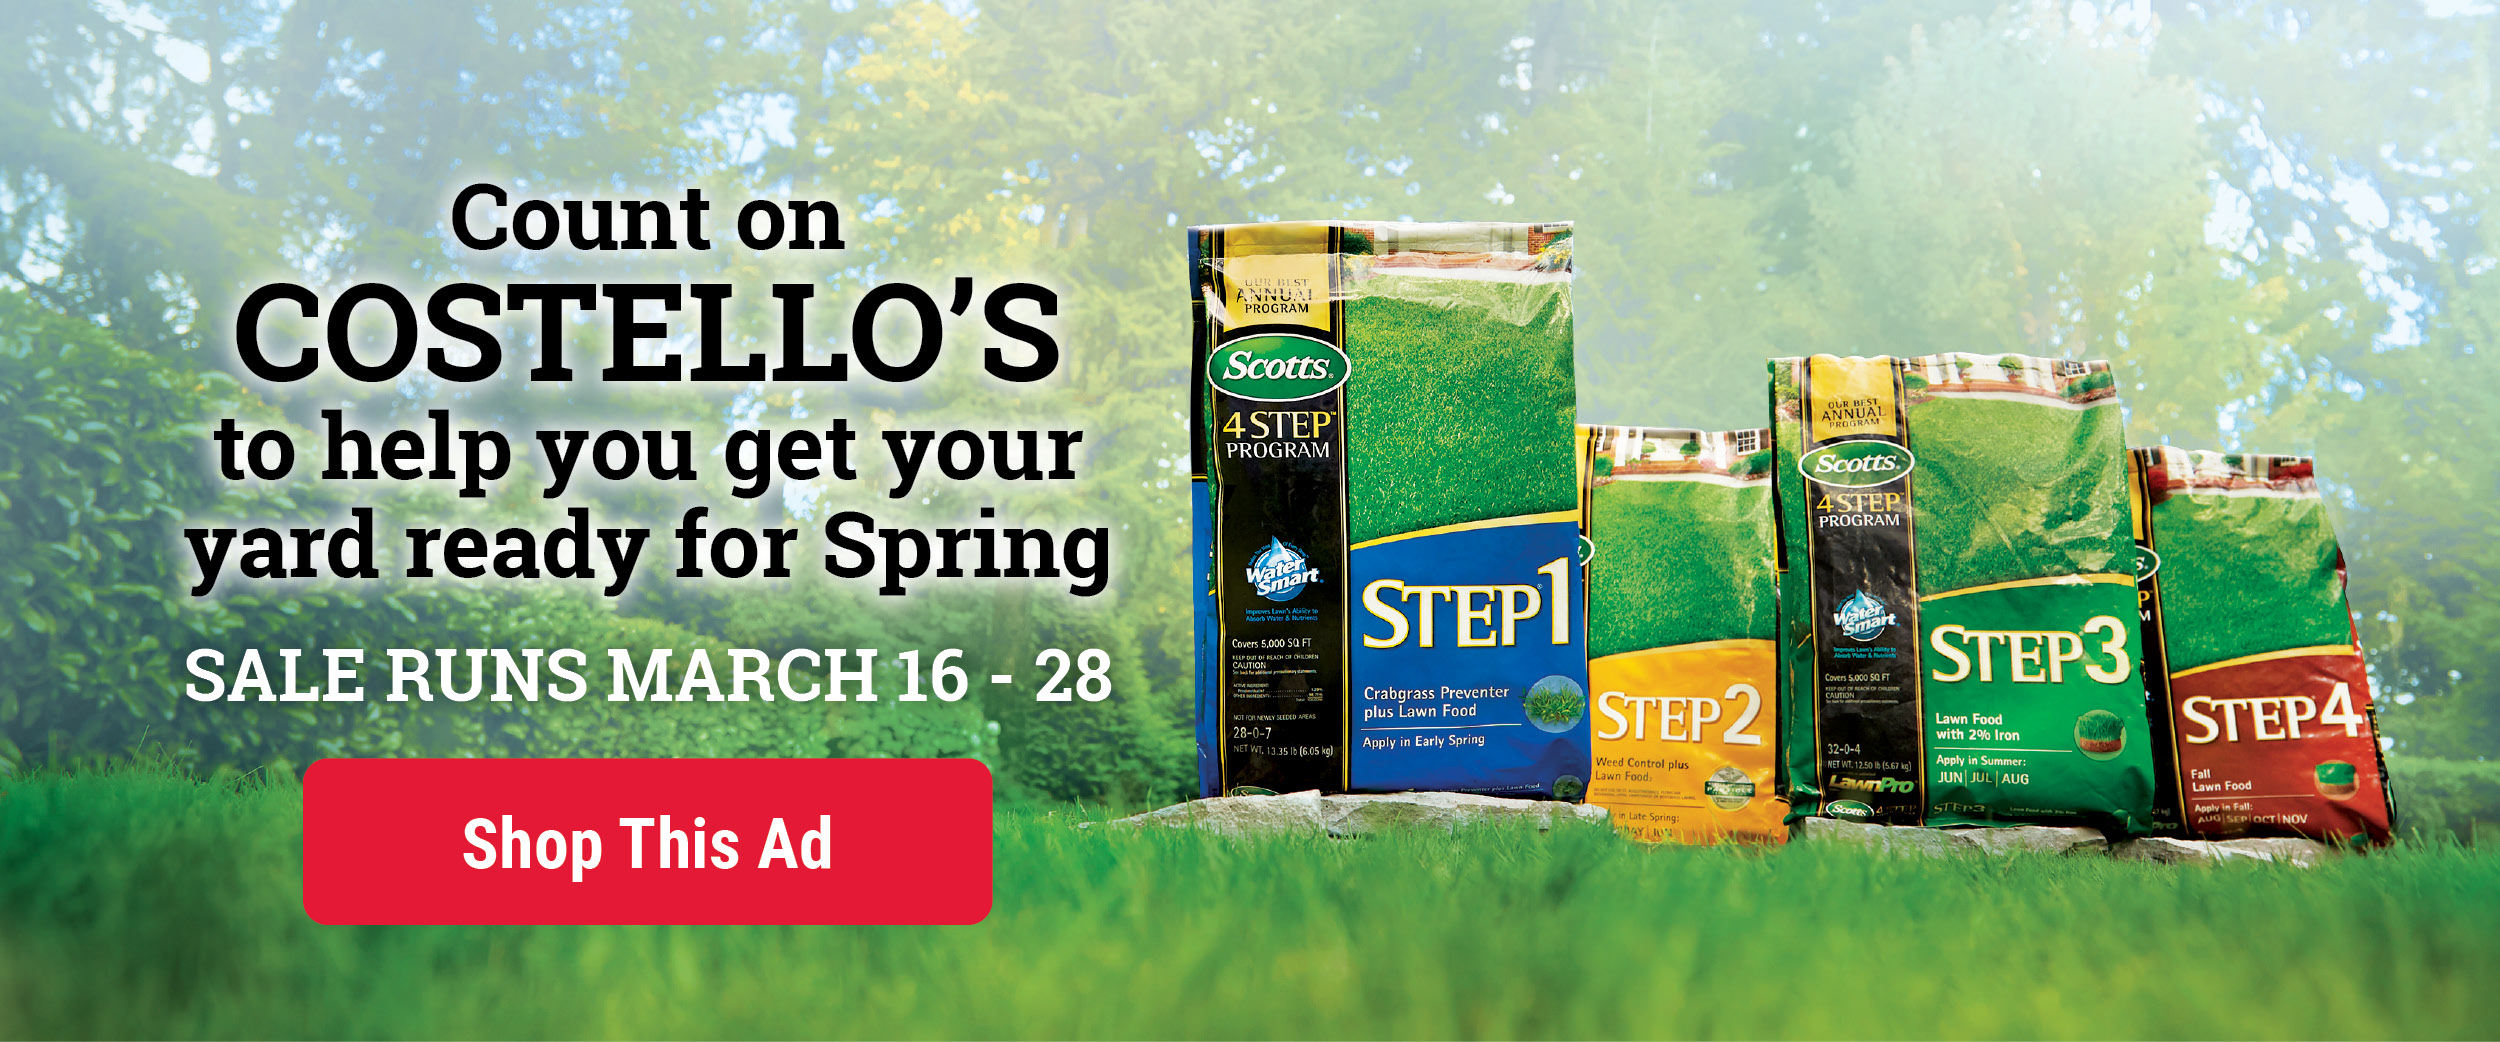 Count on Costellos to get your lawn ready for spring.